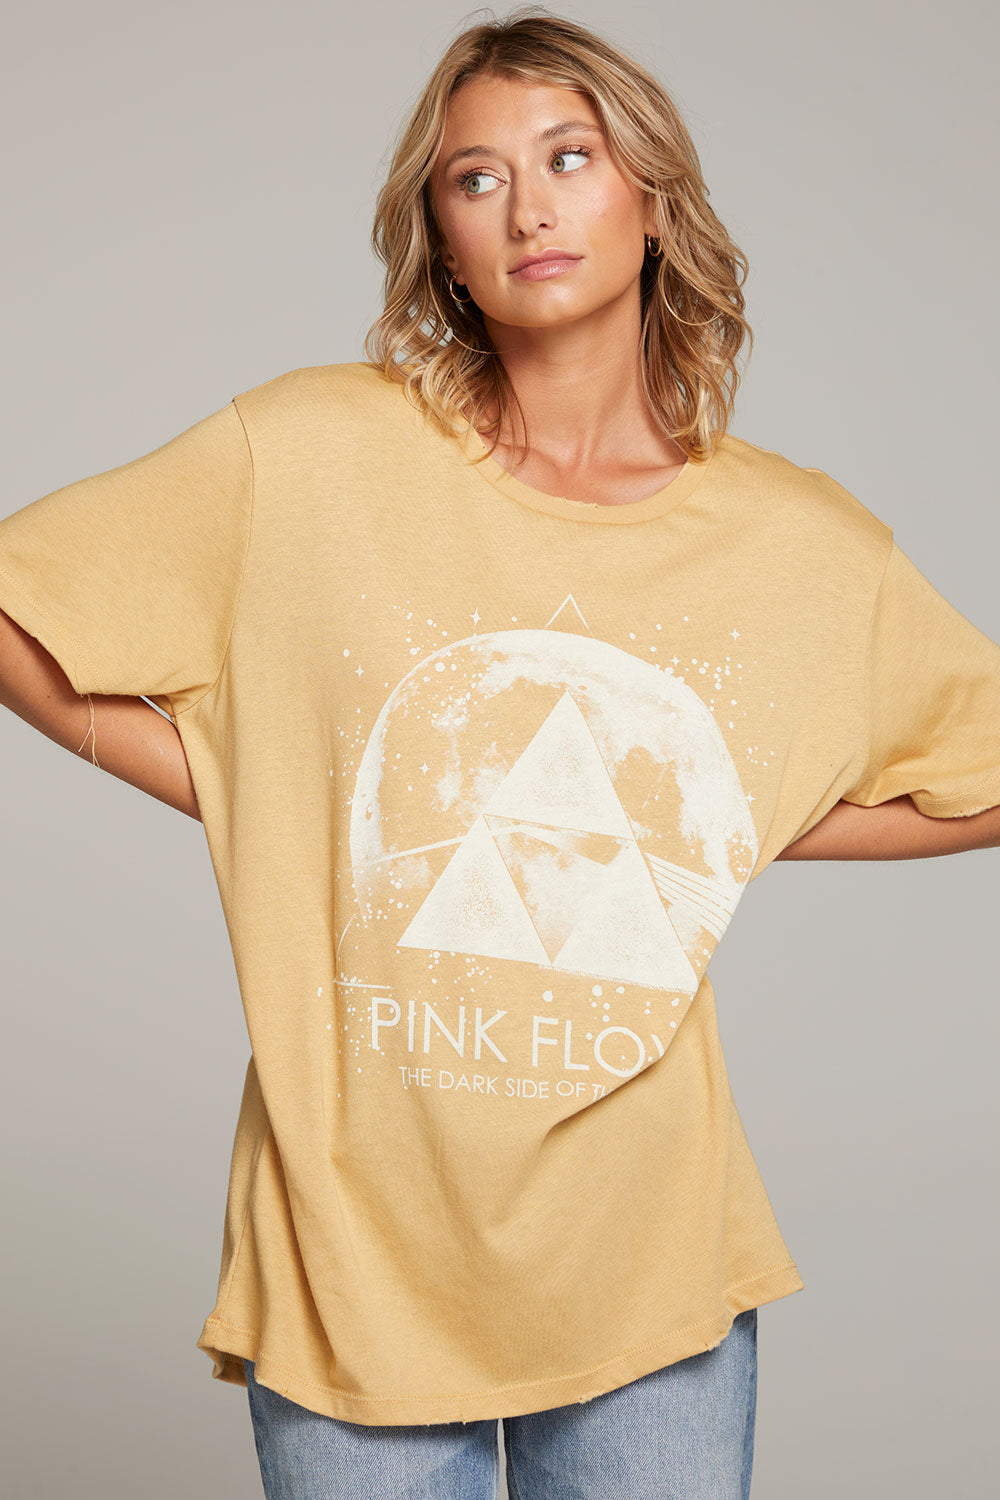 Pink Floyd Dark Side of the Moon Tee WOMENS chaserbrand